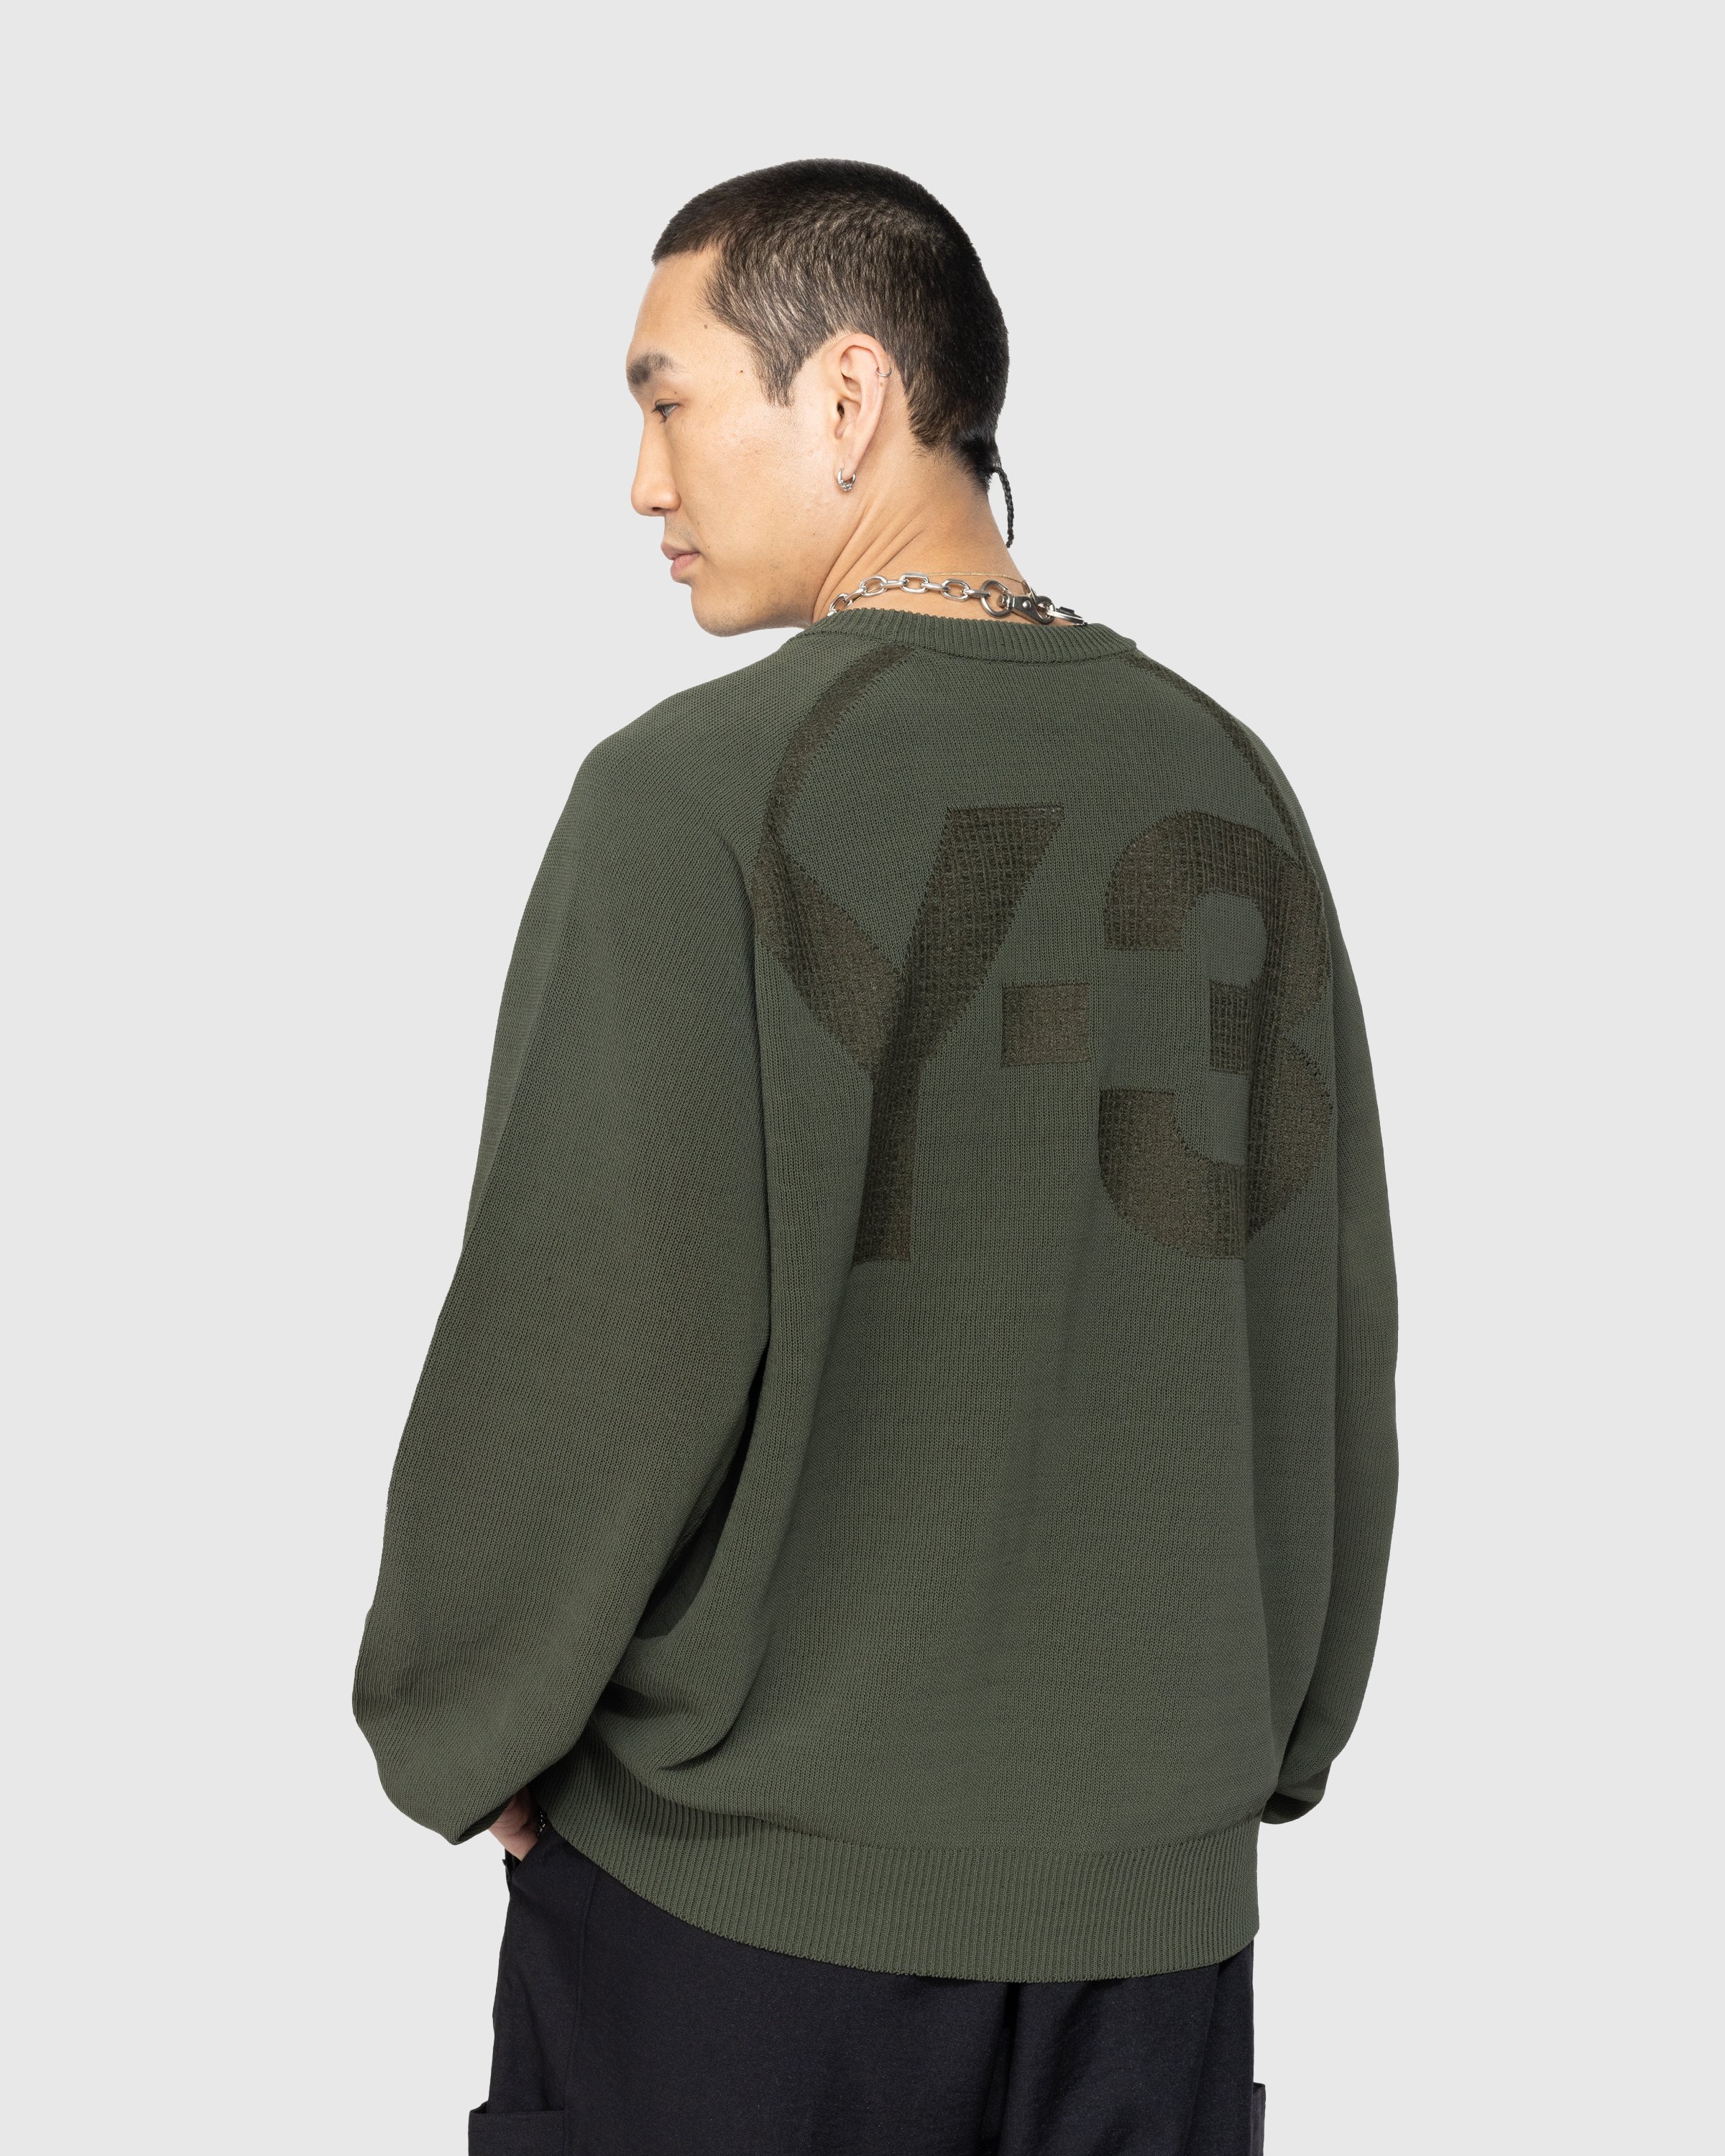 Y-3 - CL Knitted CR Sweater - Clothing - Green - Image 3